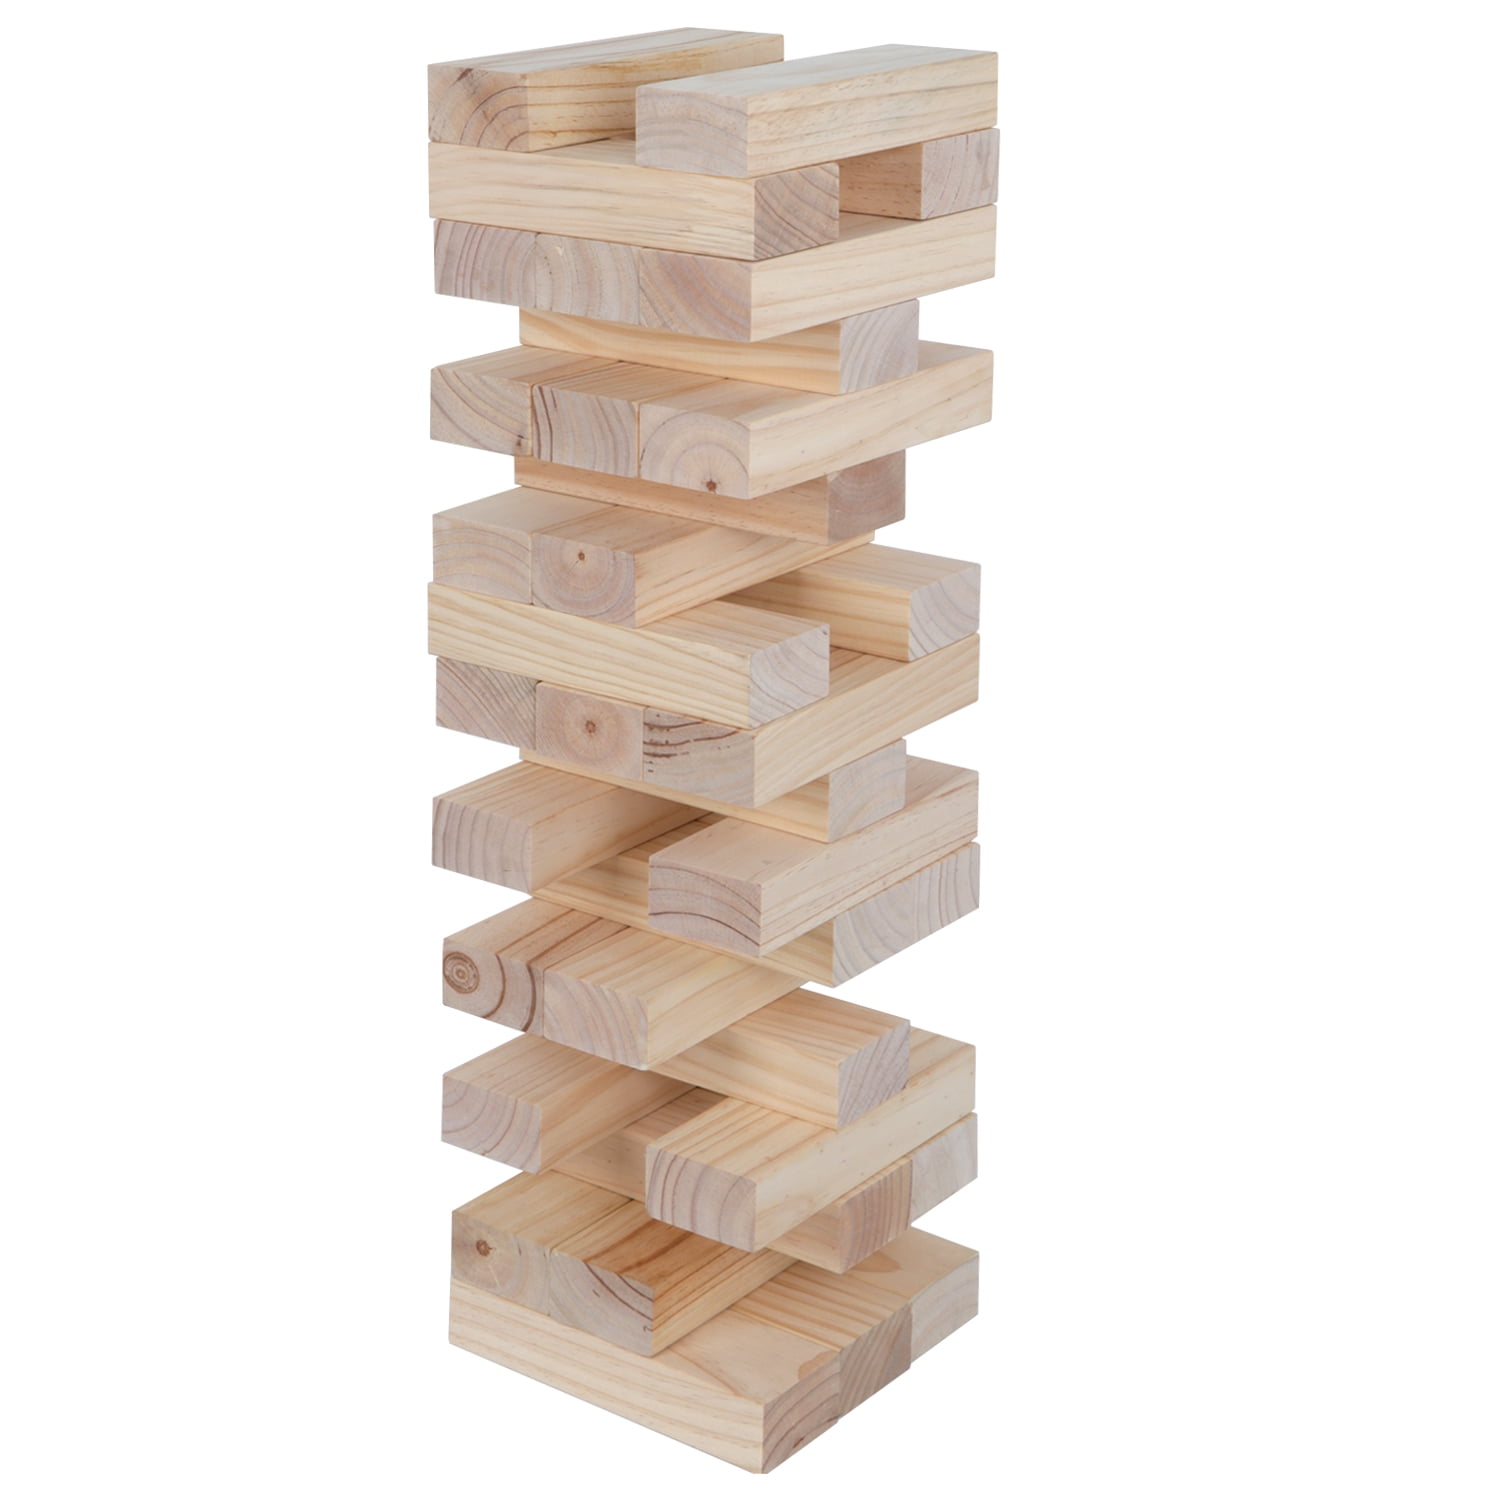 Fenteer Tumble Tower Blocks Game Toppling Tower Wood Stacking Game for Adult Family M 